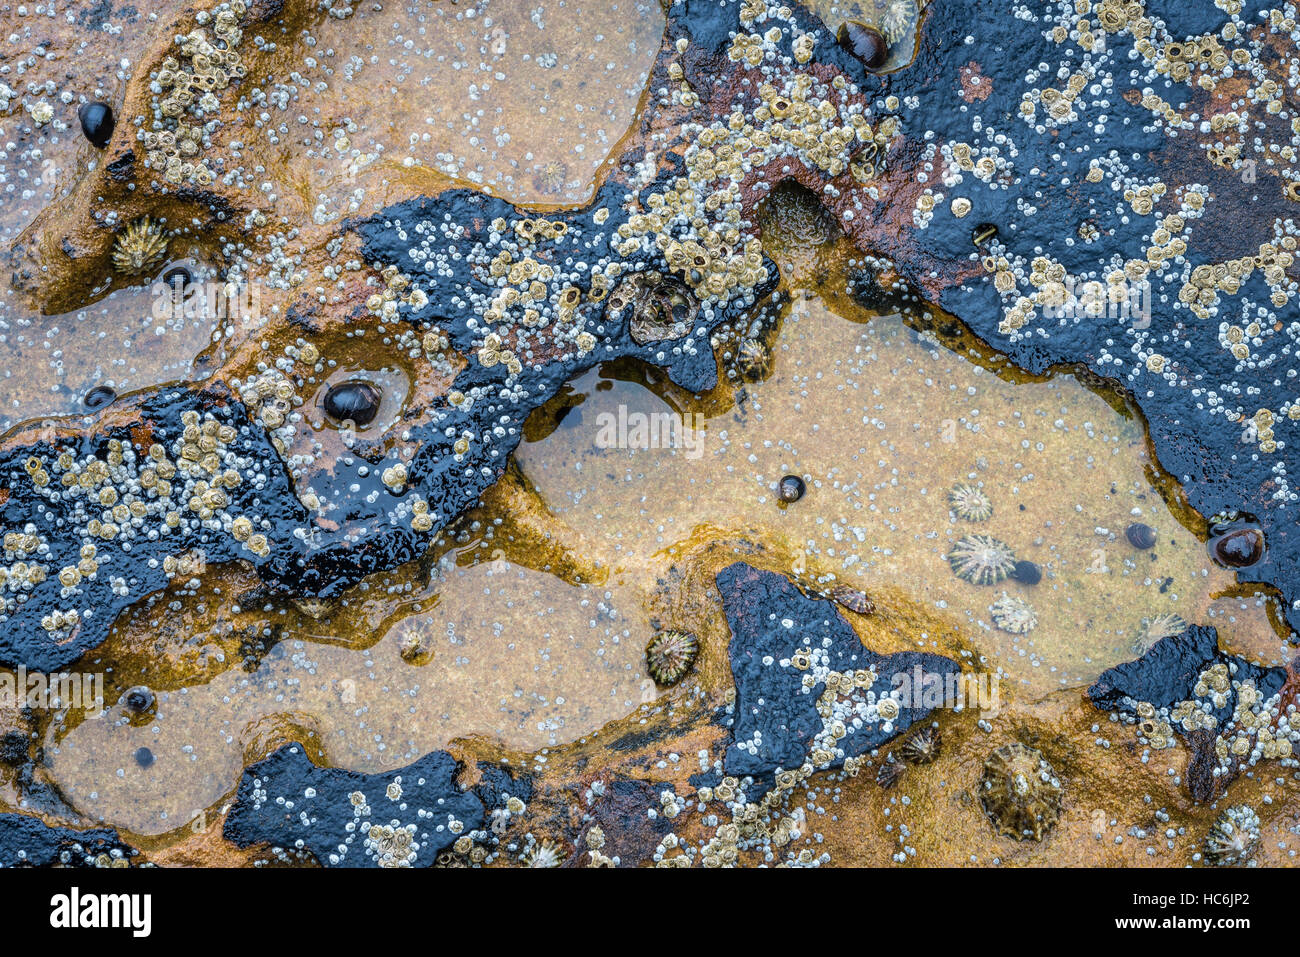 Close up of a rock pool containing Barnacles and Limpets Stock Photo